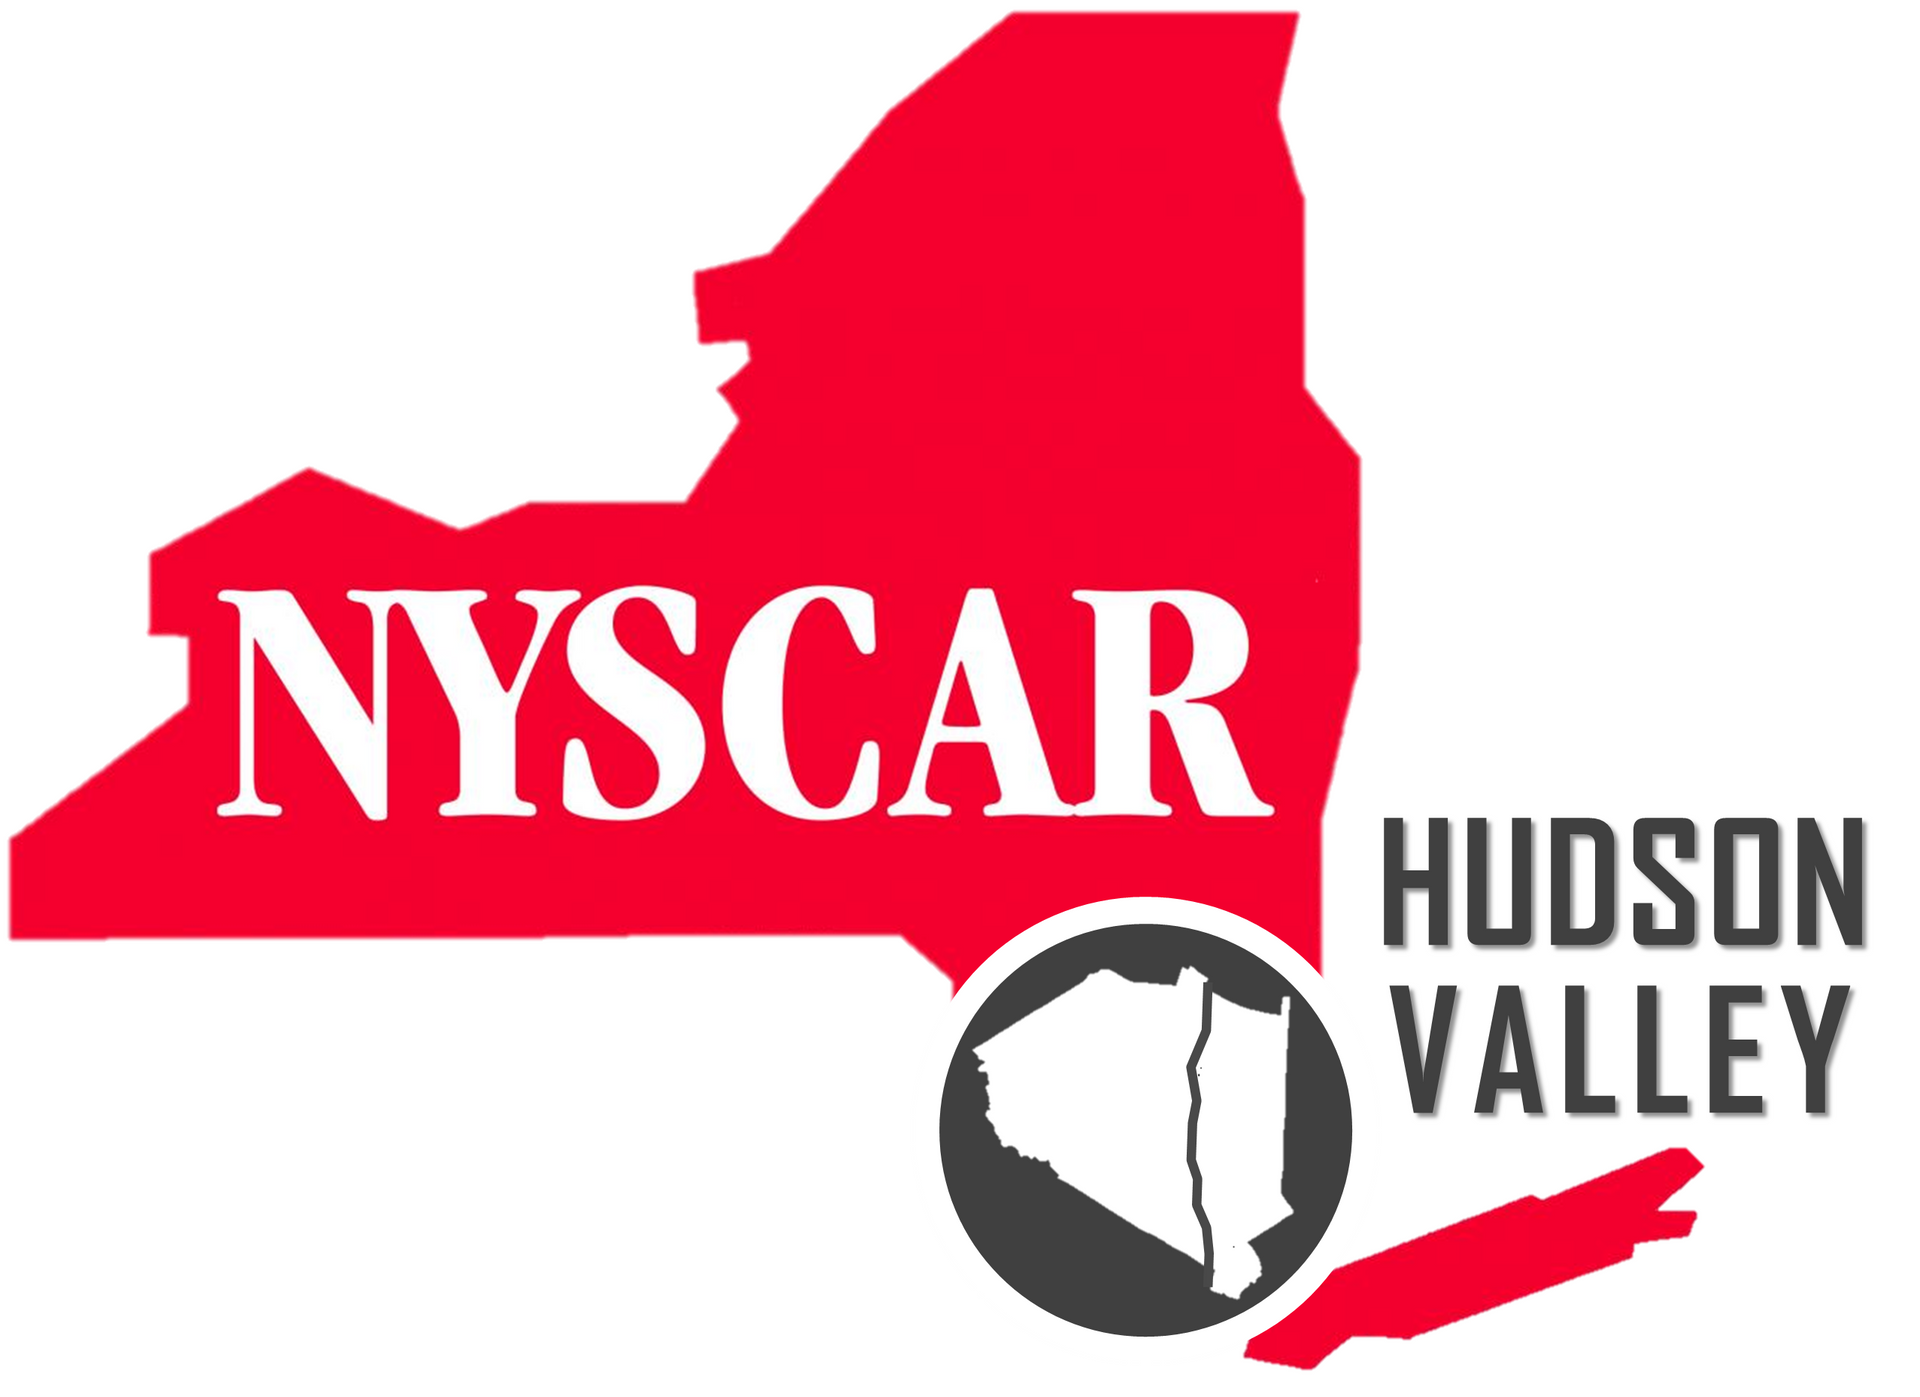 A logo for NYSCAR Hudson Valley with a map of New York